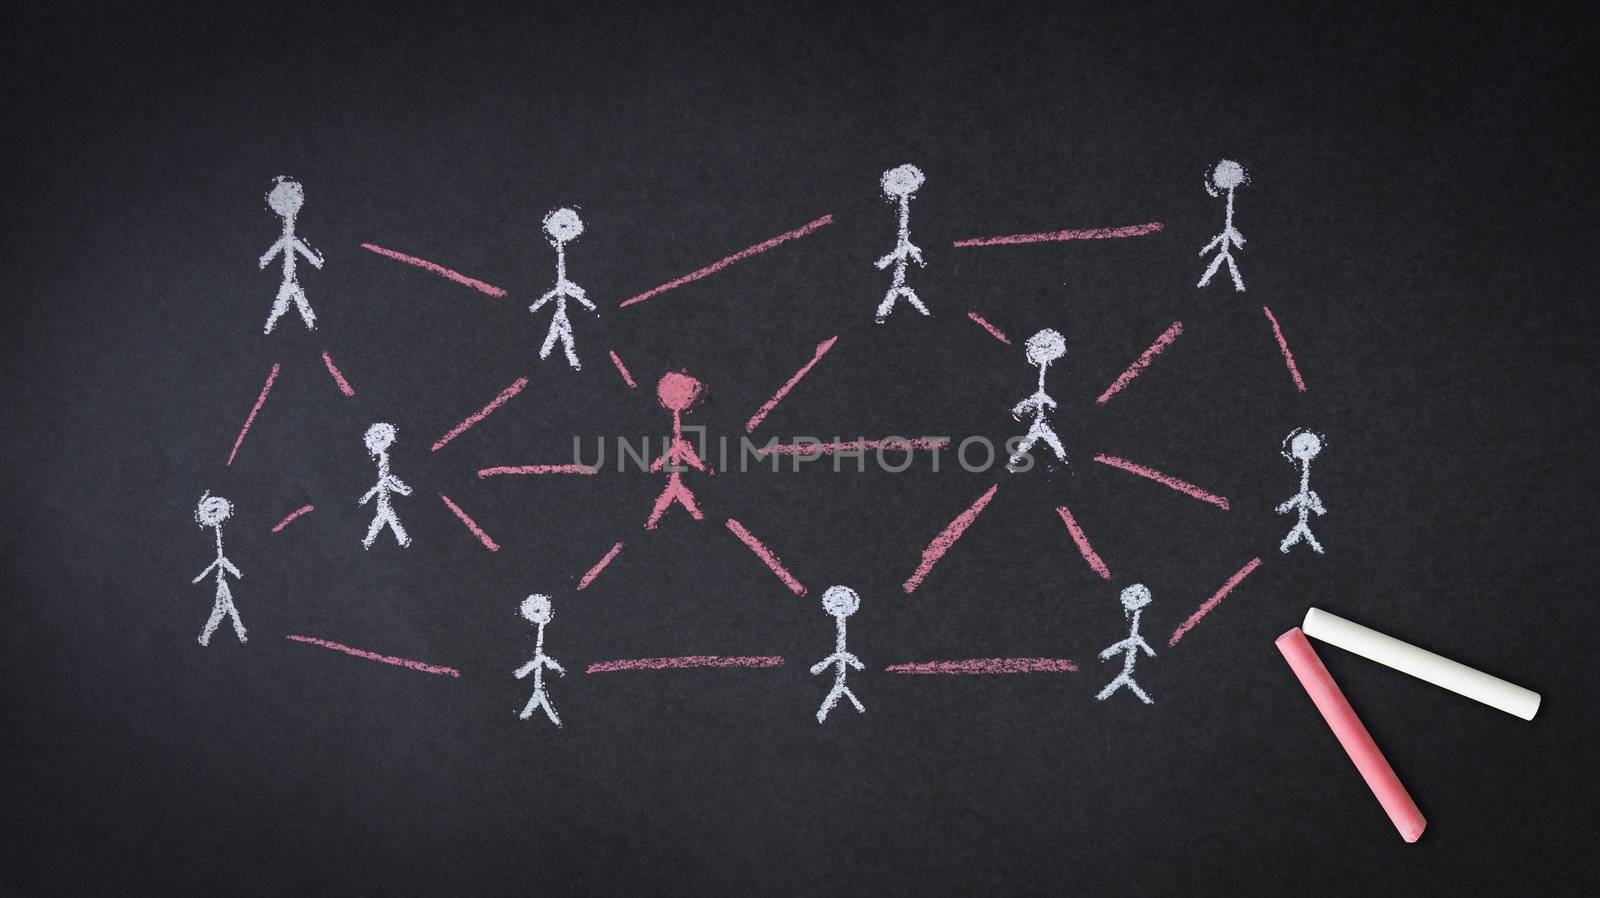 Person drawing a People Network illustration with chalk on a blackboard.